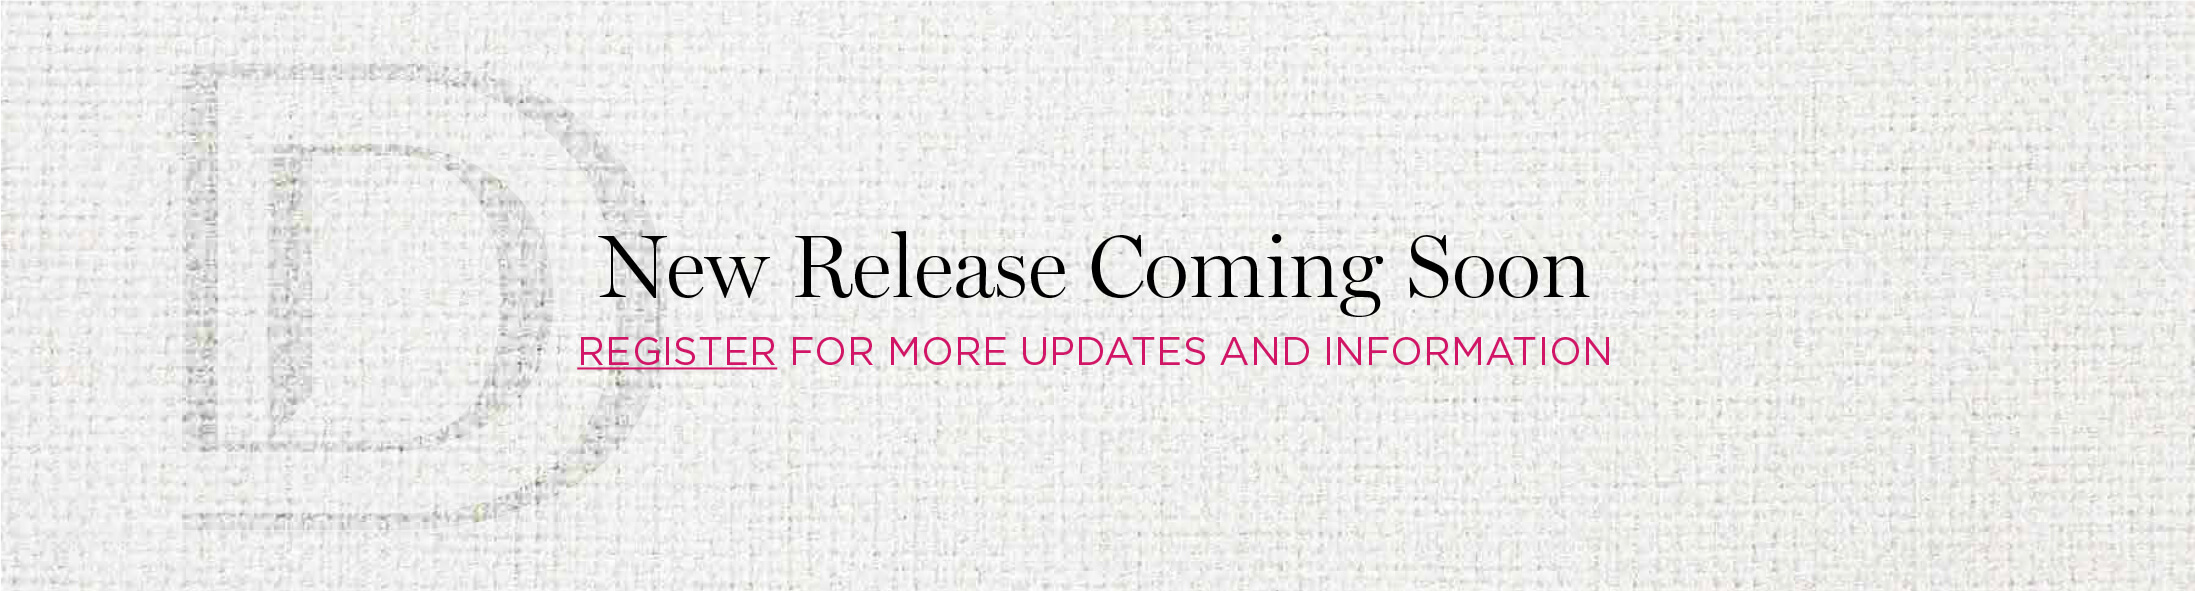 Deco - New Releases coming soon, register for more updates and information